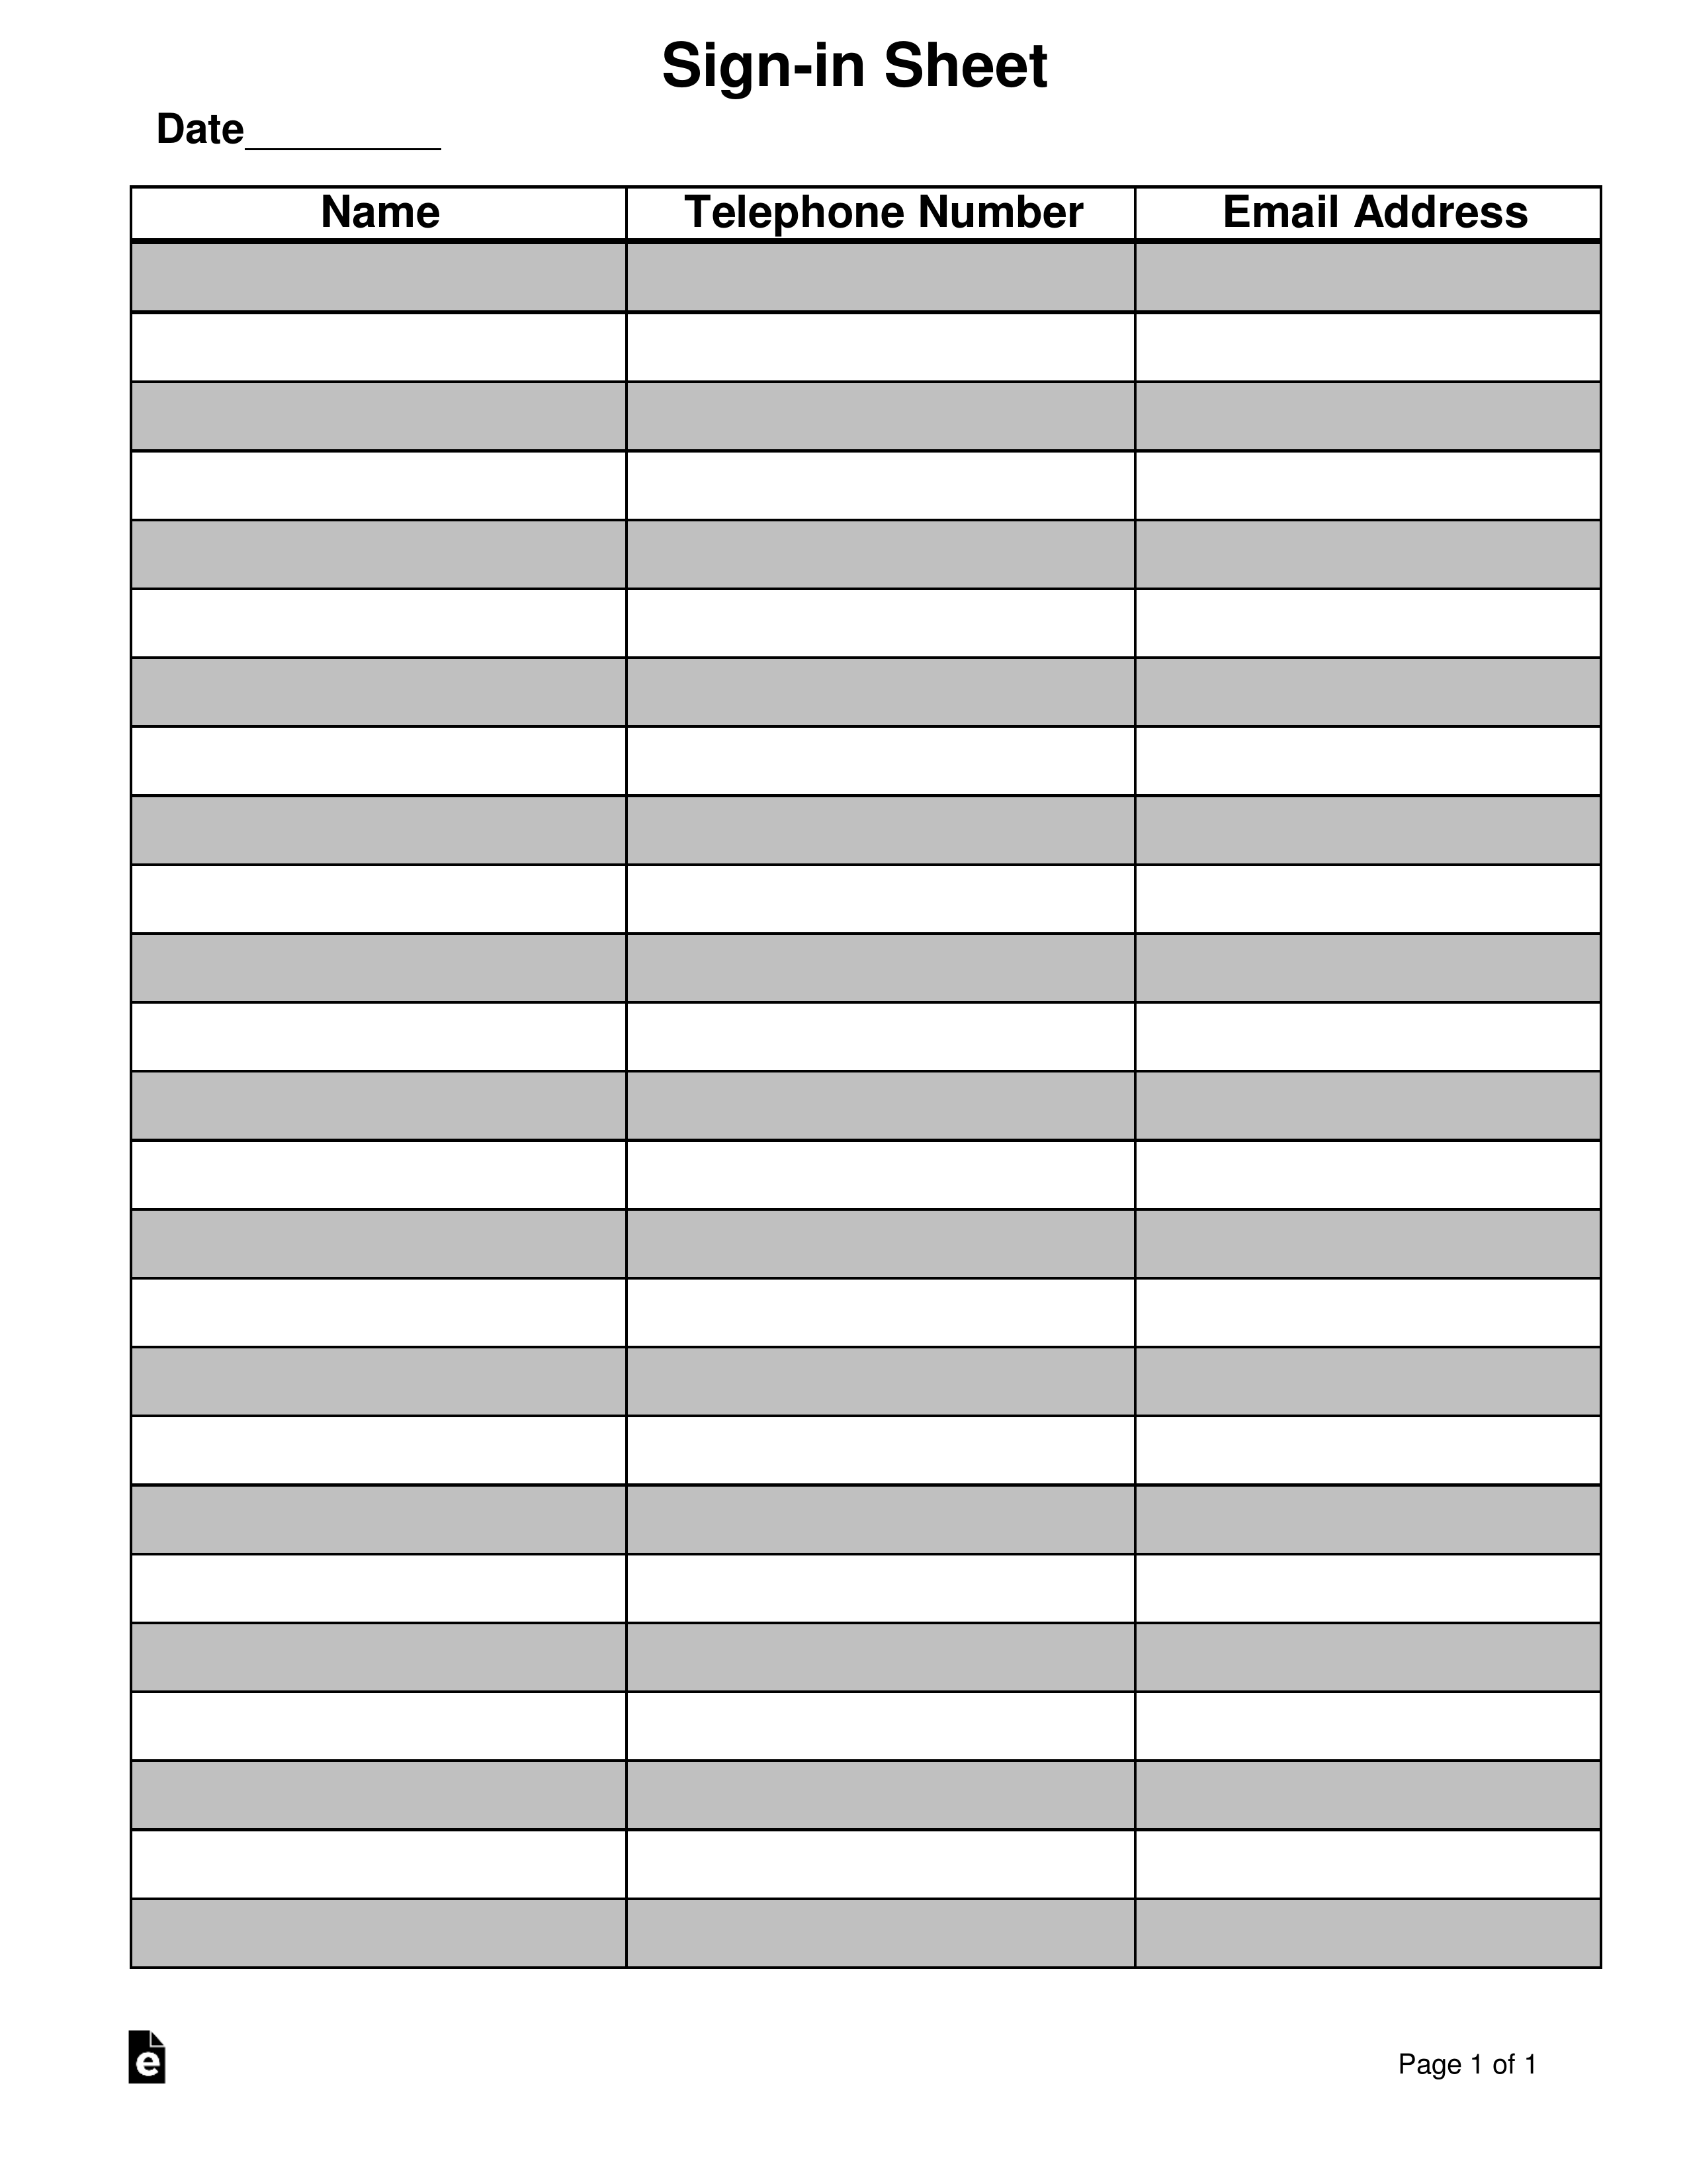 attendance-guest-sign-in-sheet-template-eforms